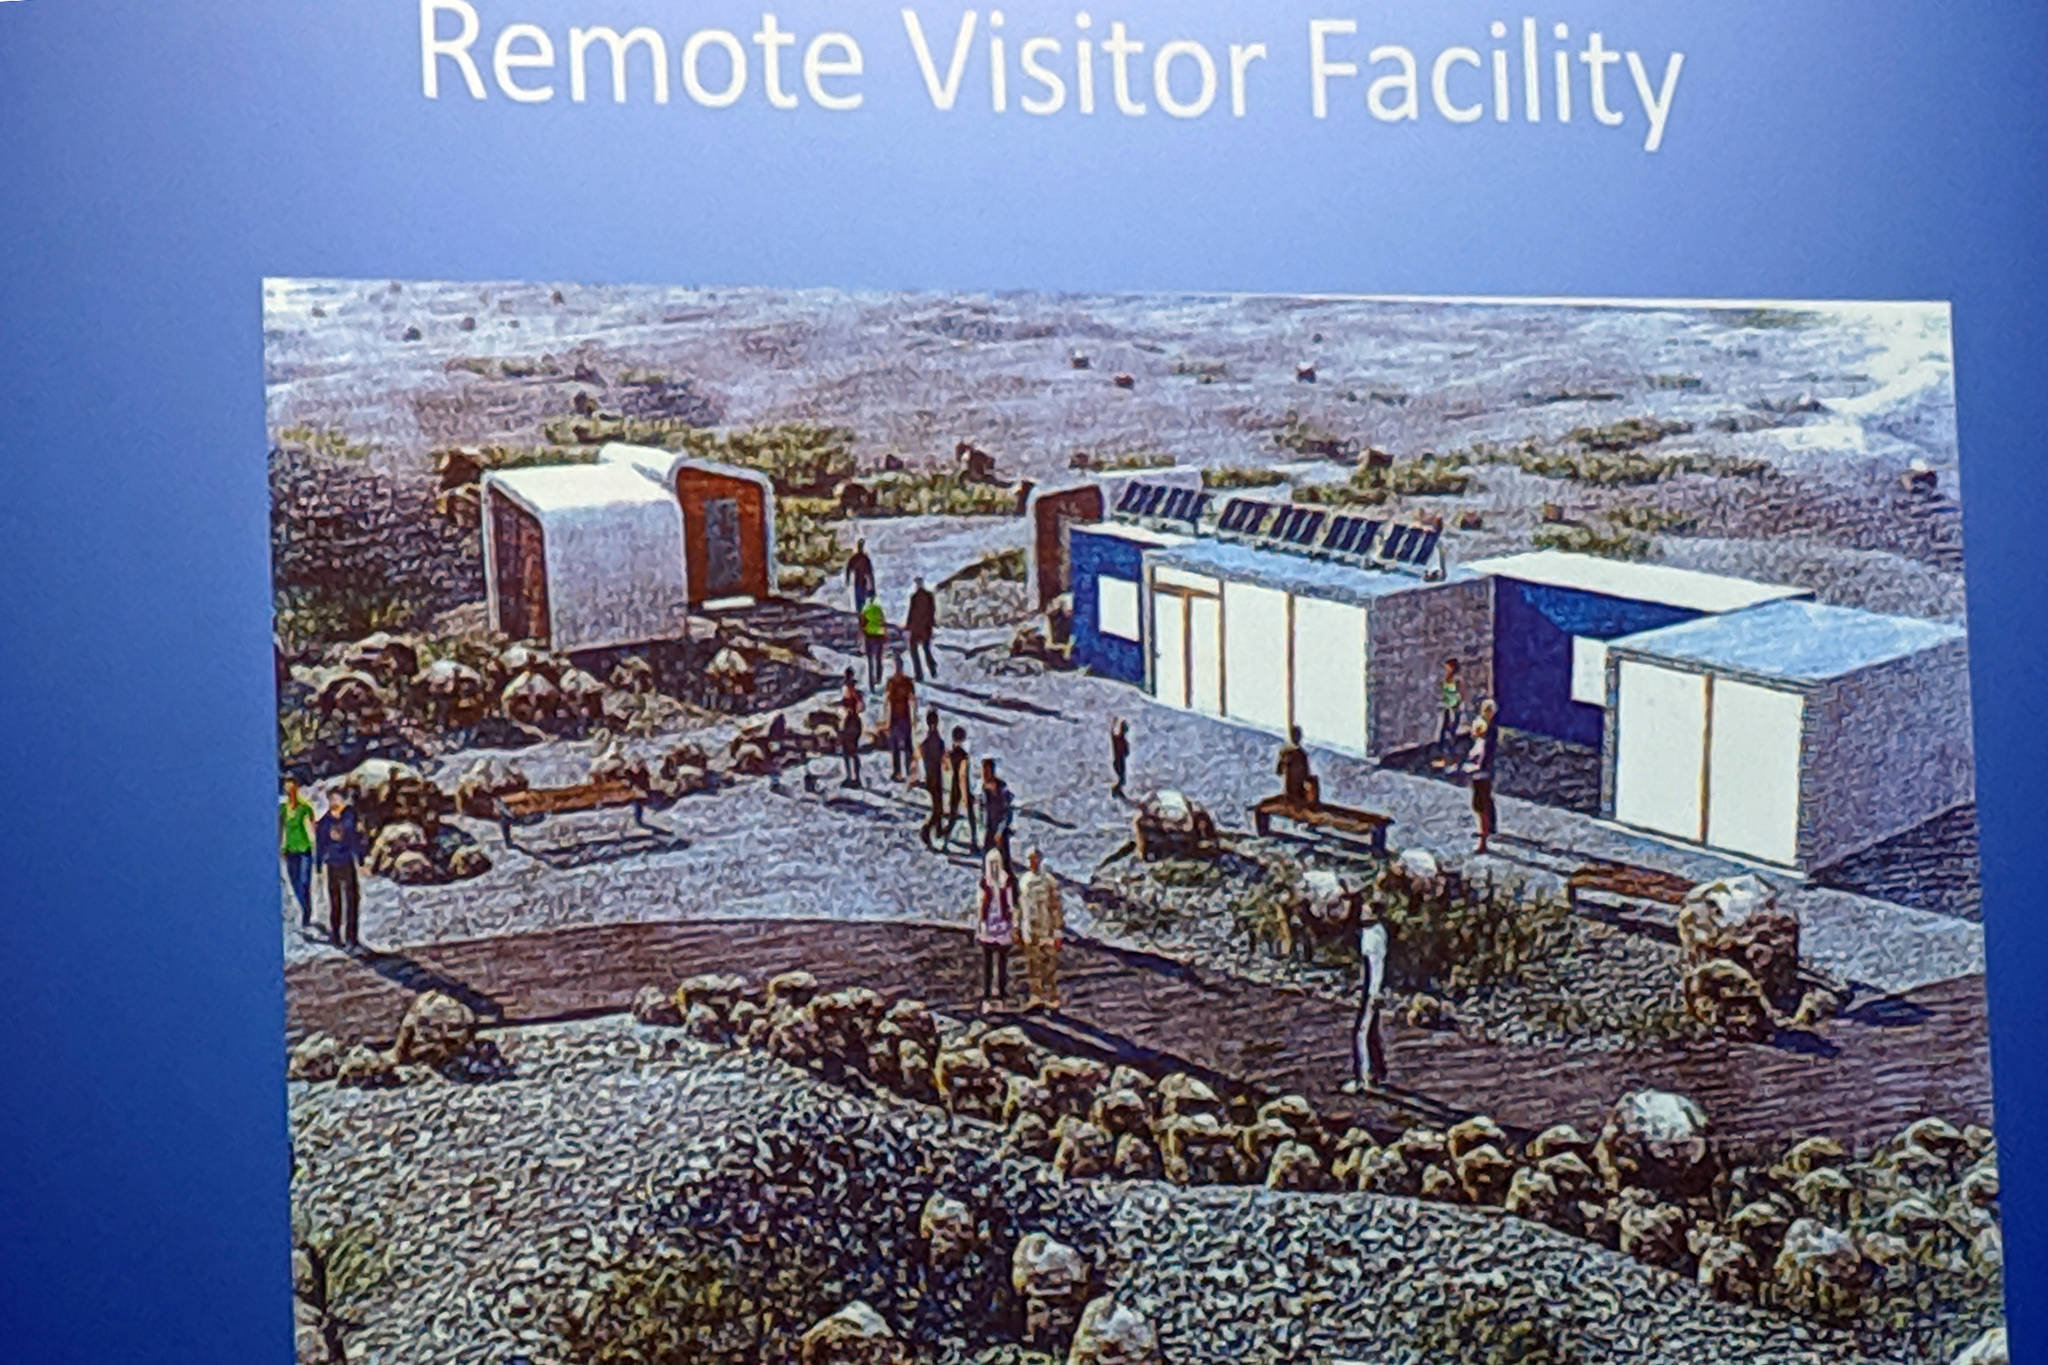 An artist’s rendering of what a visitor facility near the Mendenhall Glacier could look like was included in U.S. Forest Service Juneau District Ranger Brad Orr’s presentation to the Greater Juneau Chamber of Commerce Thursday, June 27, 2019. (Ben Hohenstatt | Juneau Empire)